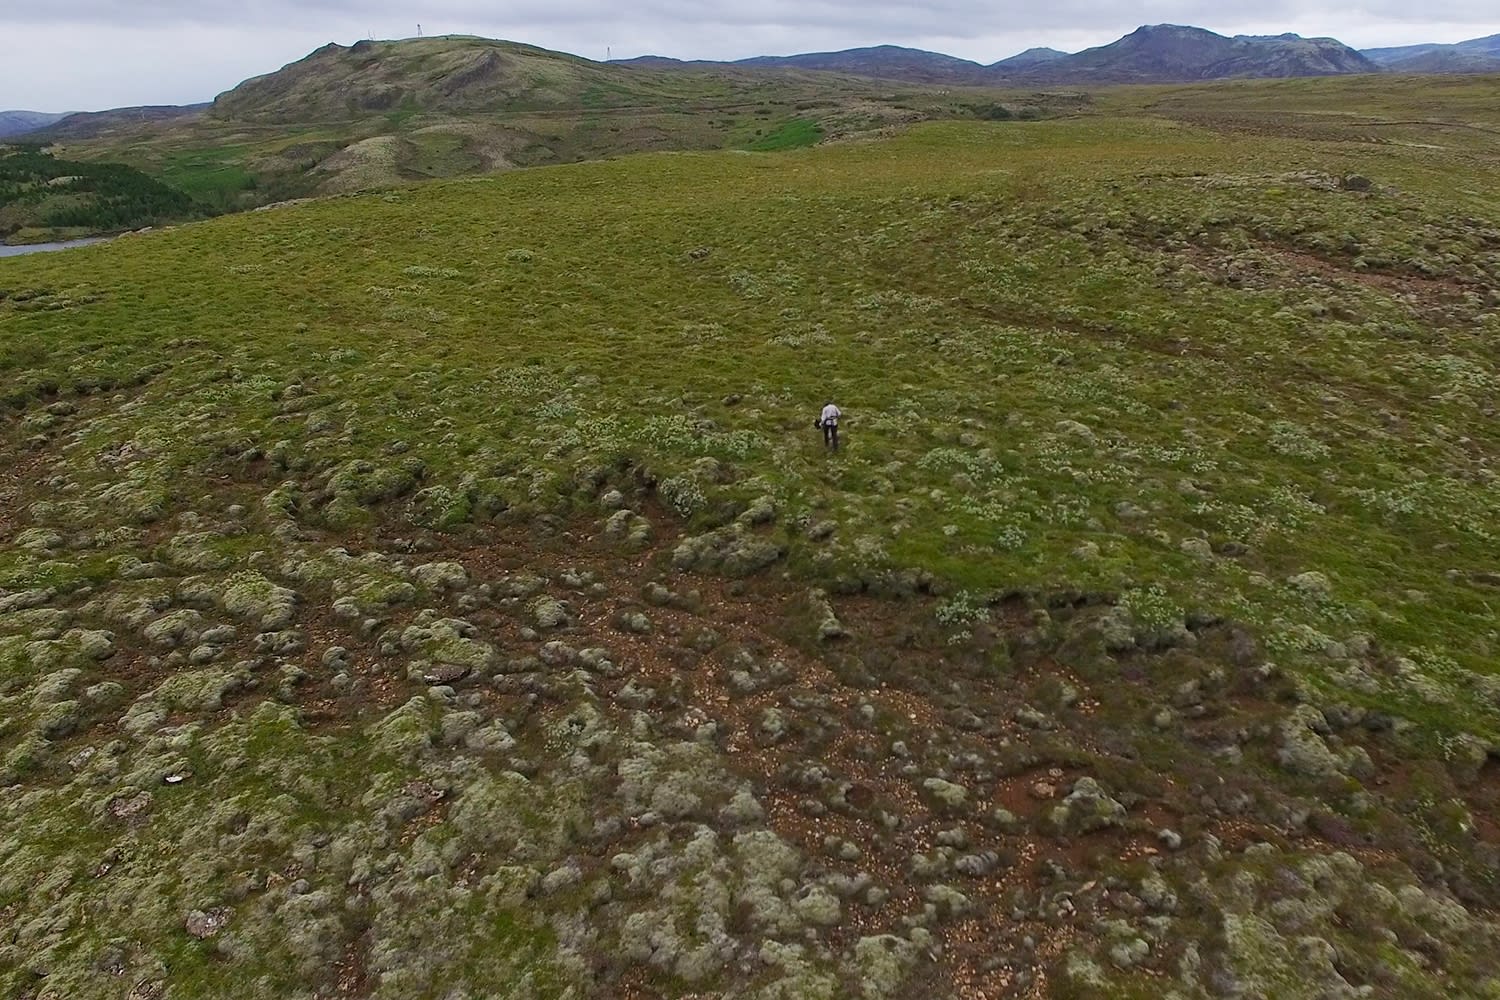 An aerial view of the Icelandic nature with somebody working to plant trees in the land